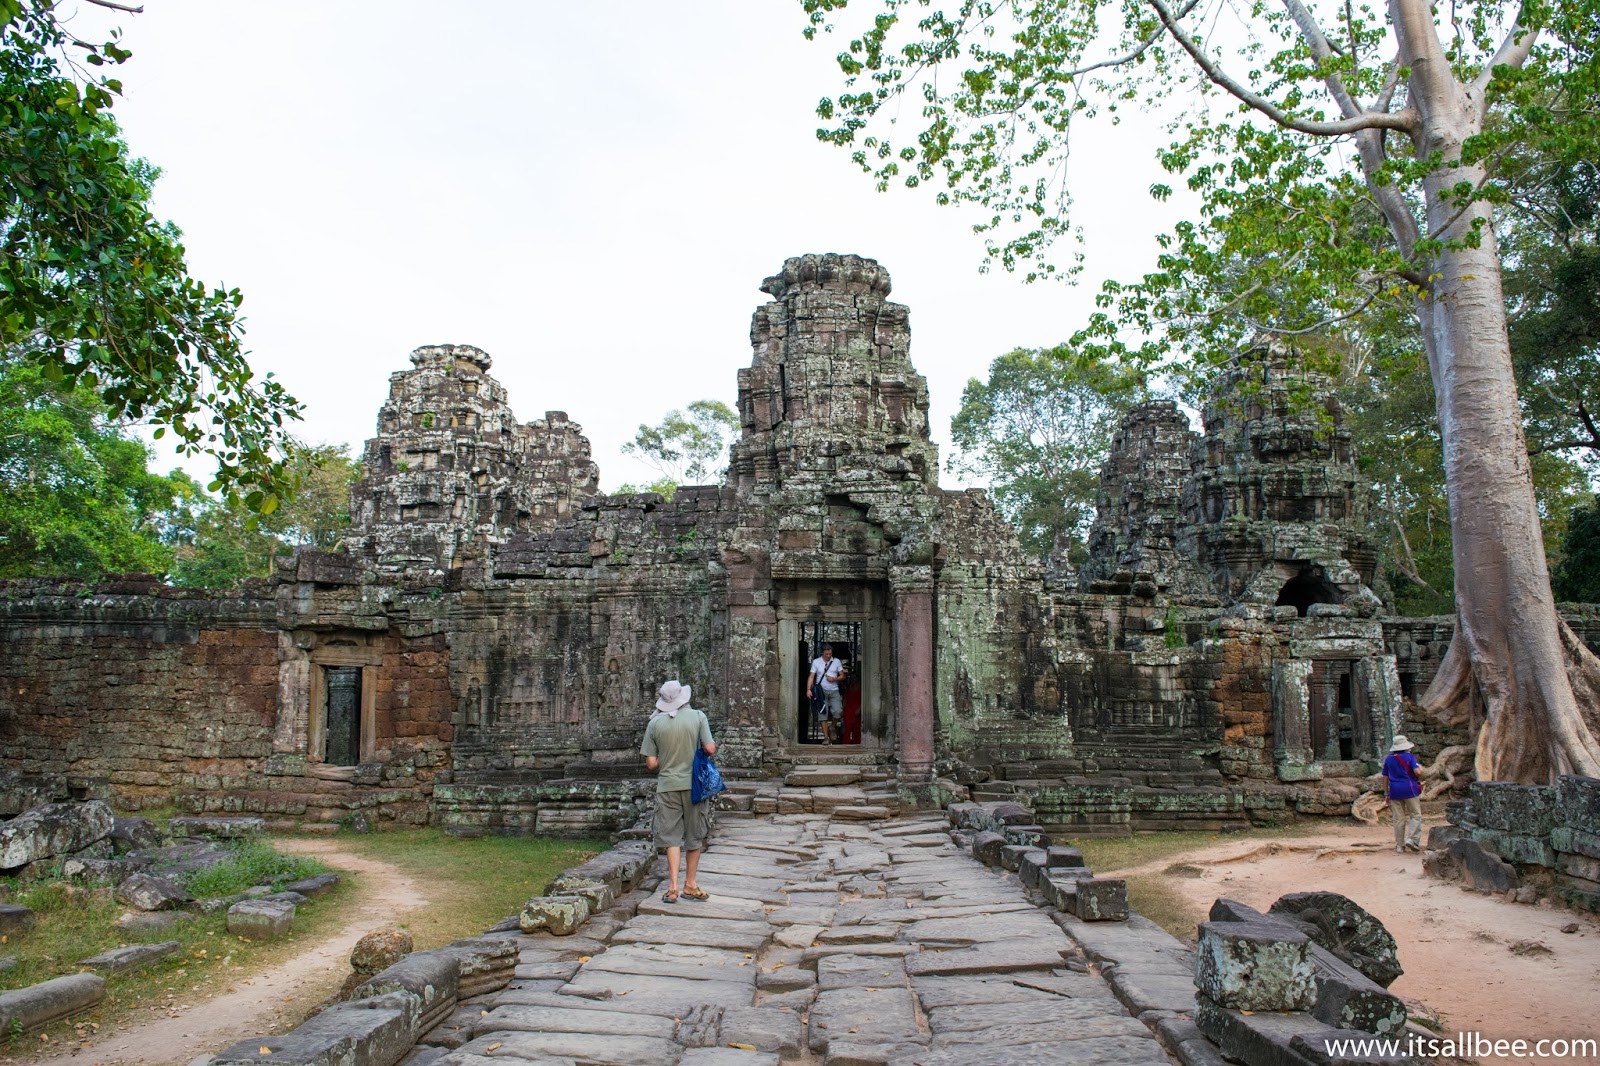 Exploring Cambodia's Banteay Kdei Temple In Siem Reap - A Citadel of Chambers